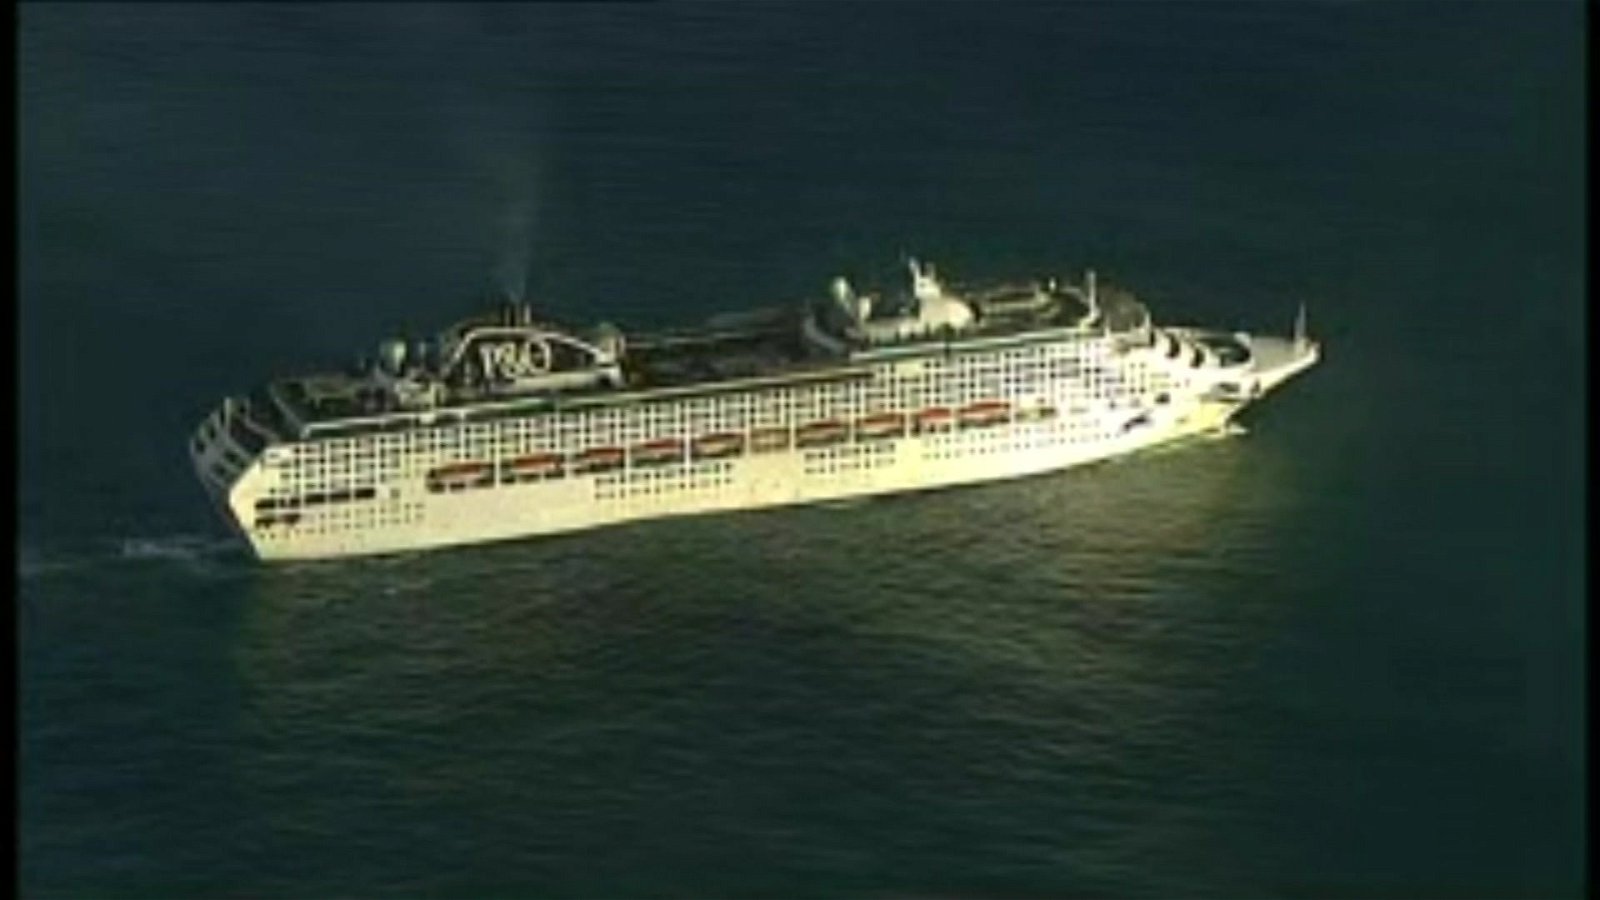 A large cruise ship in the ocean